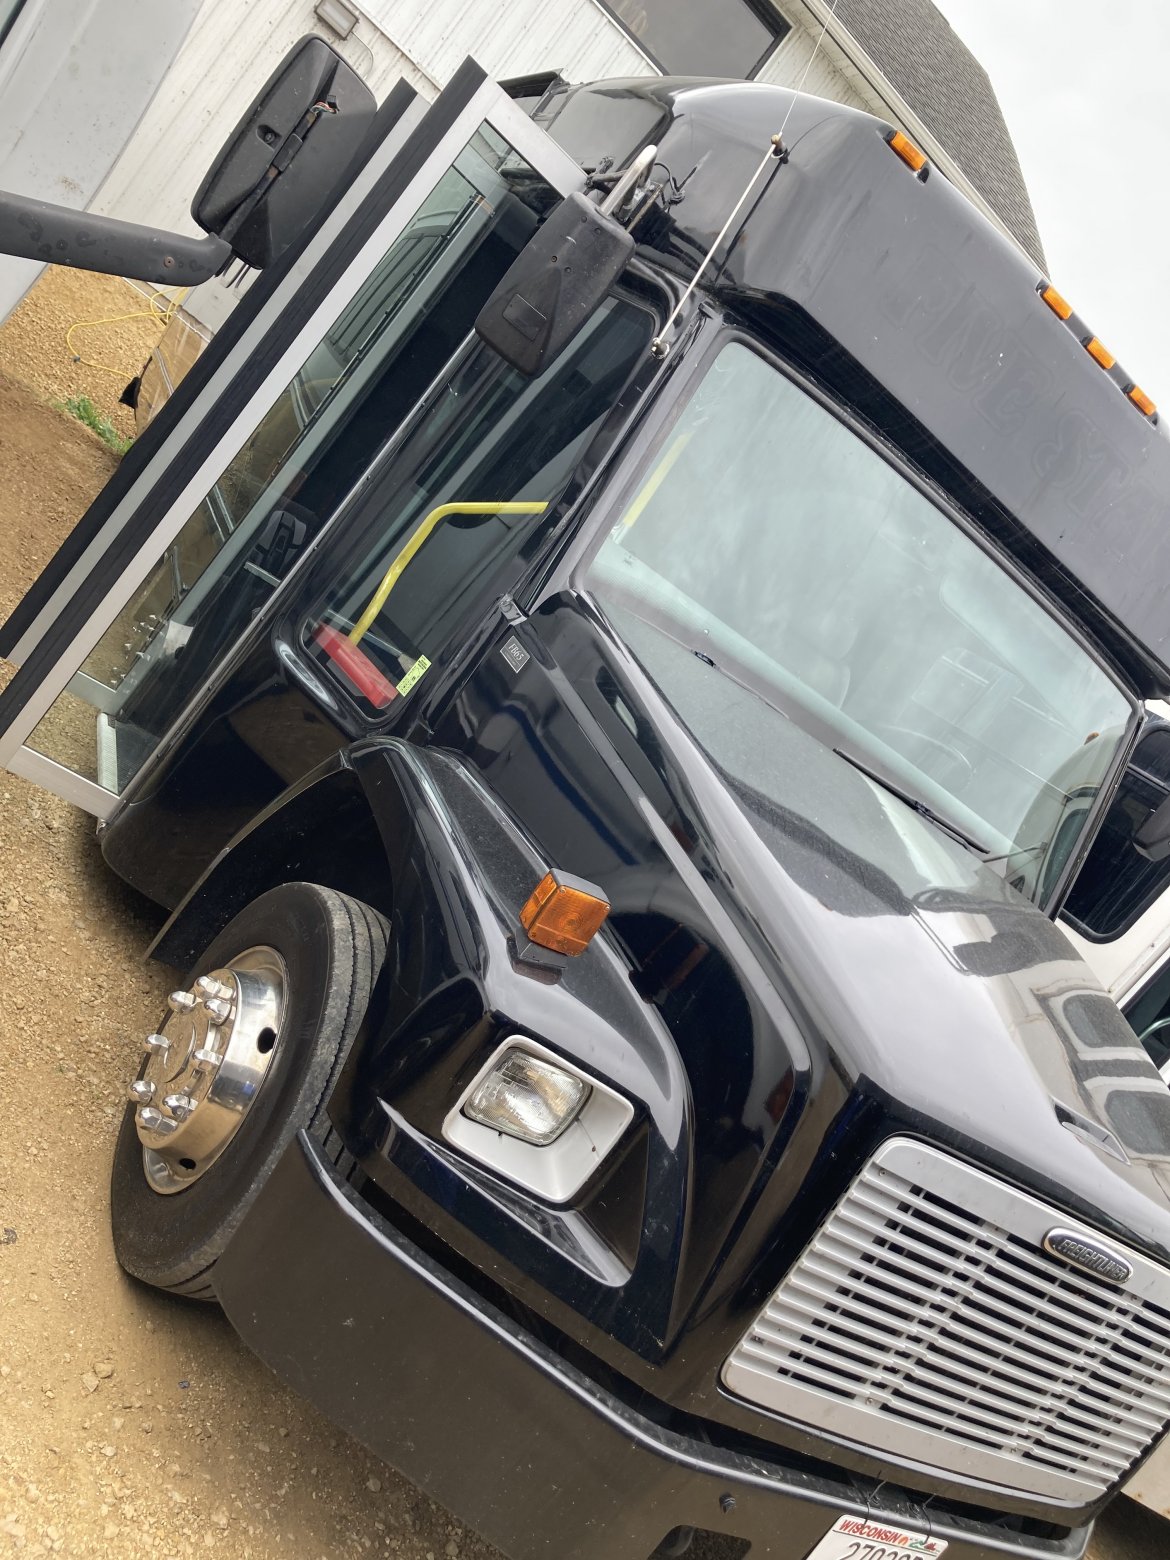 Limo Bus for sale: 2004 Freightliner Bus